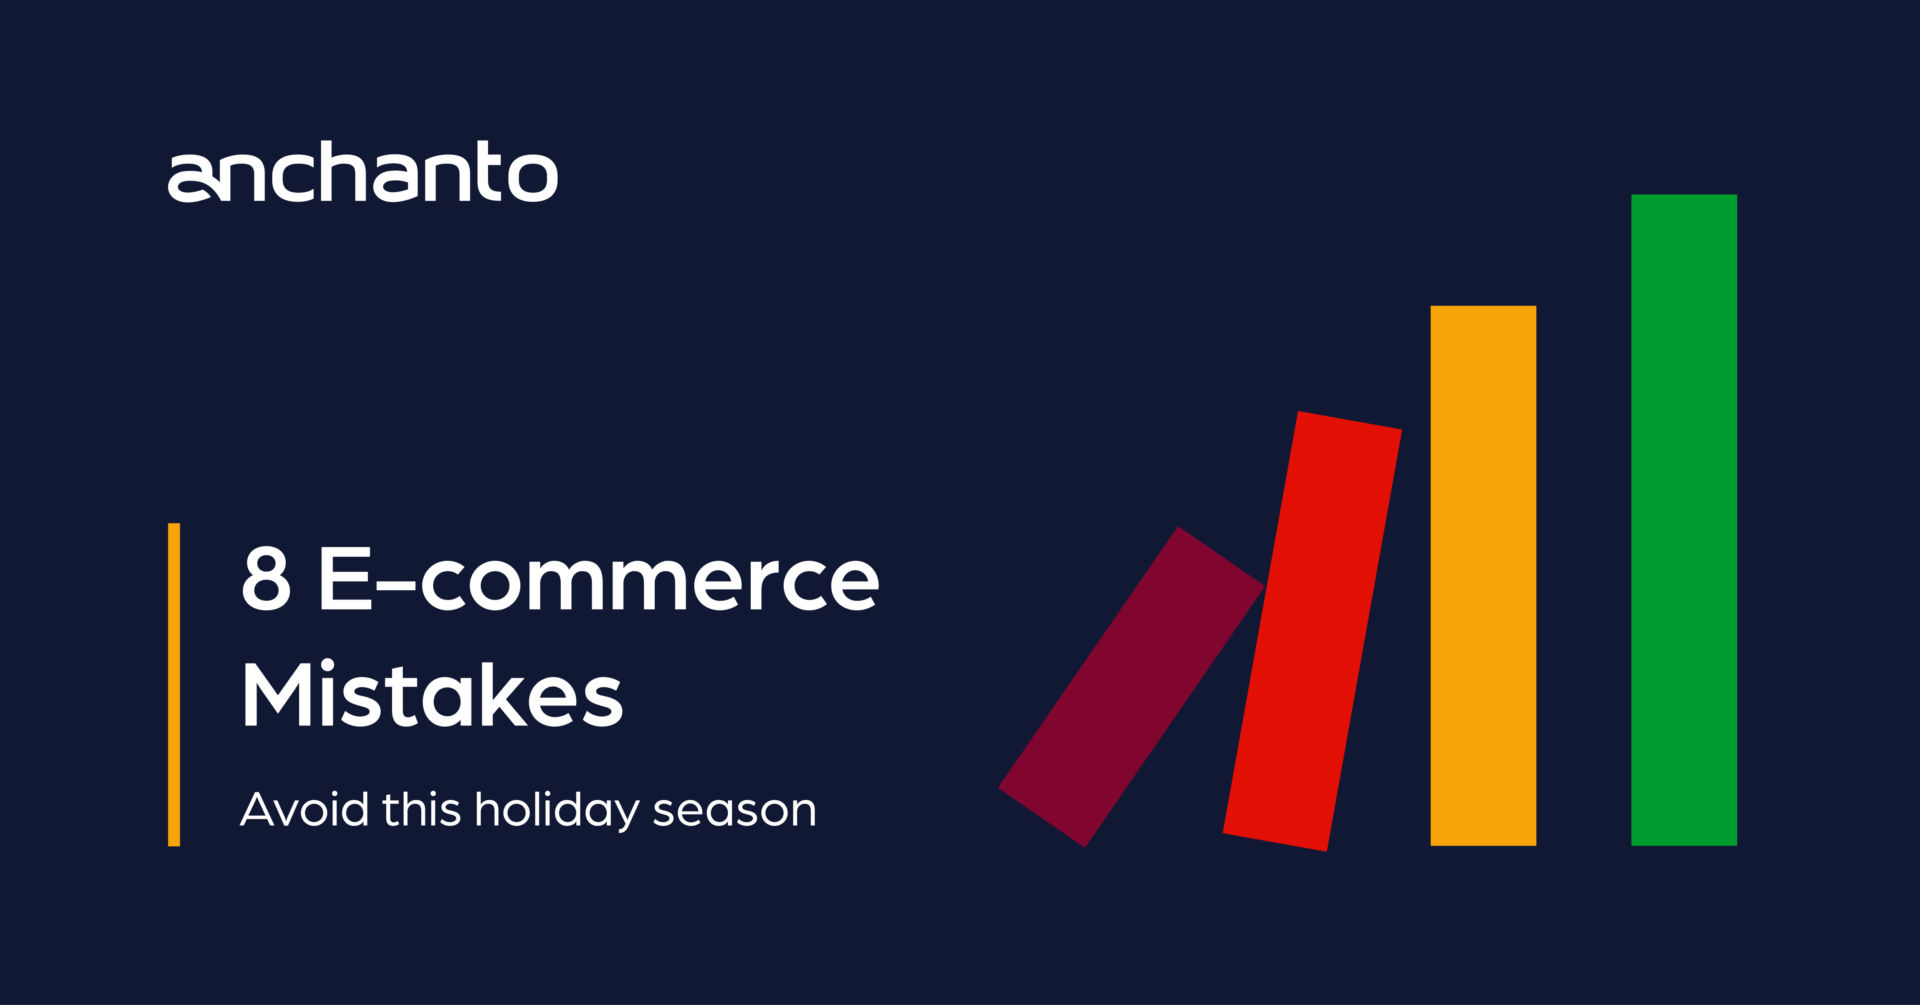 8 E-commerce Mistakes to Avoid this Holiday Season